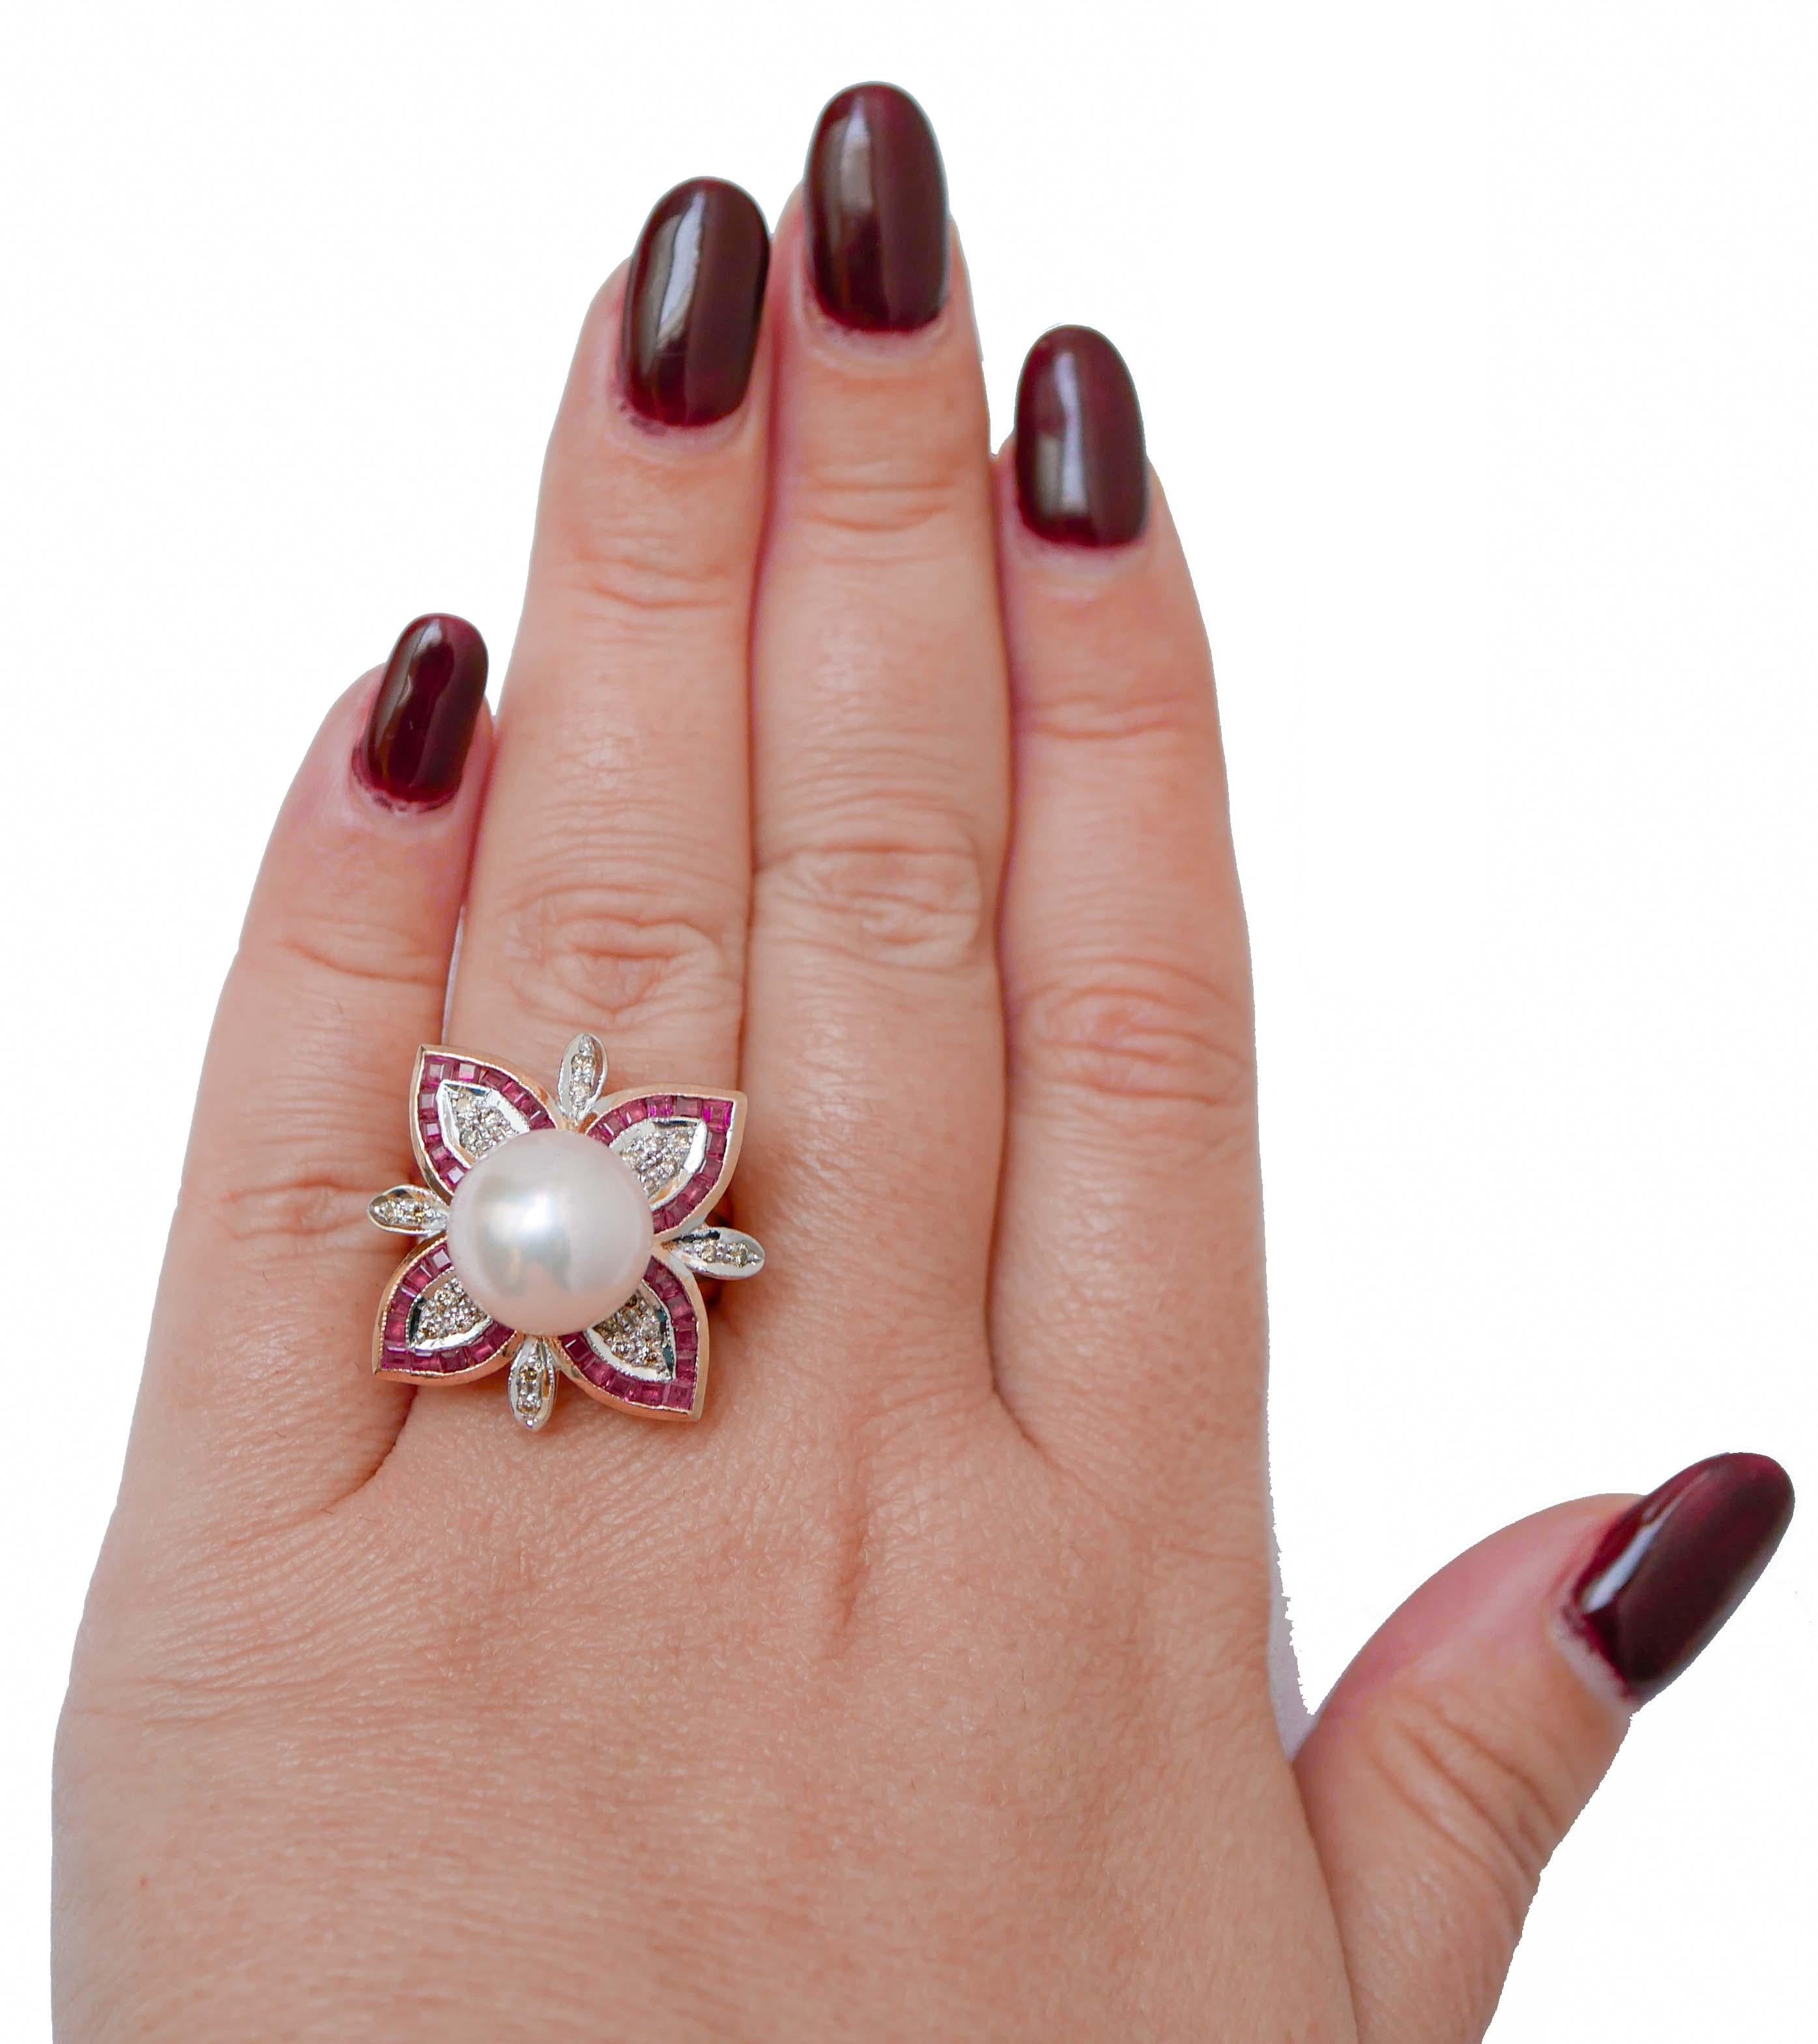 Mixed Cut Pearl, Rubies, Diamonds, Rose Gold and Silver  Ring. For Sale